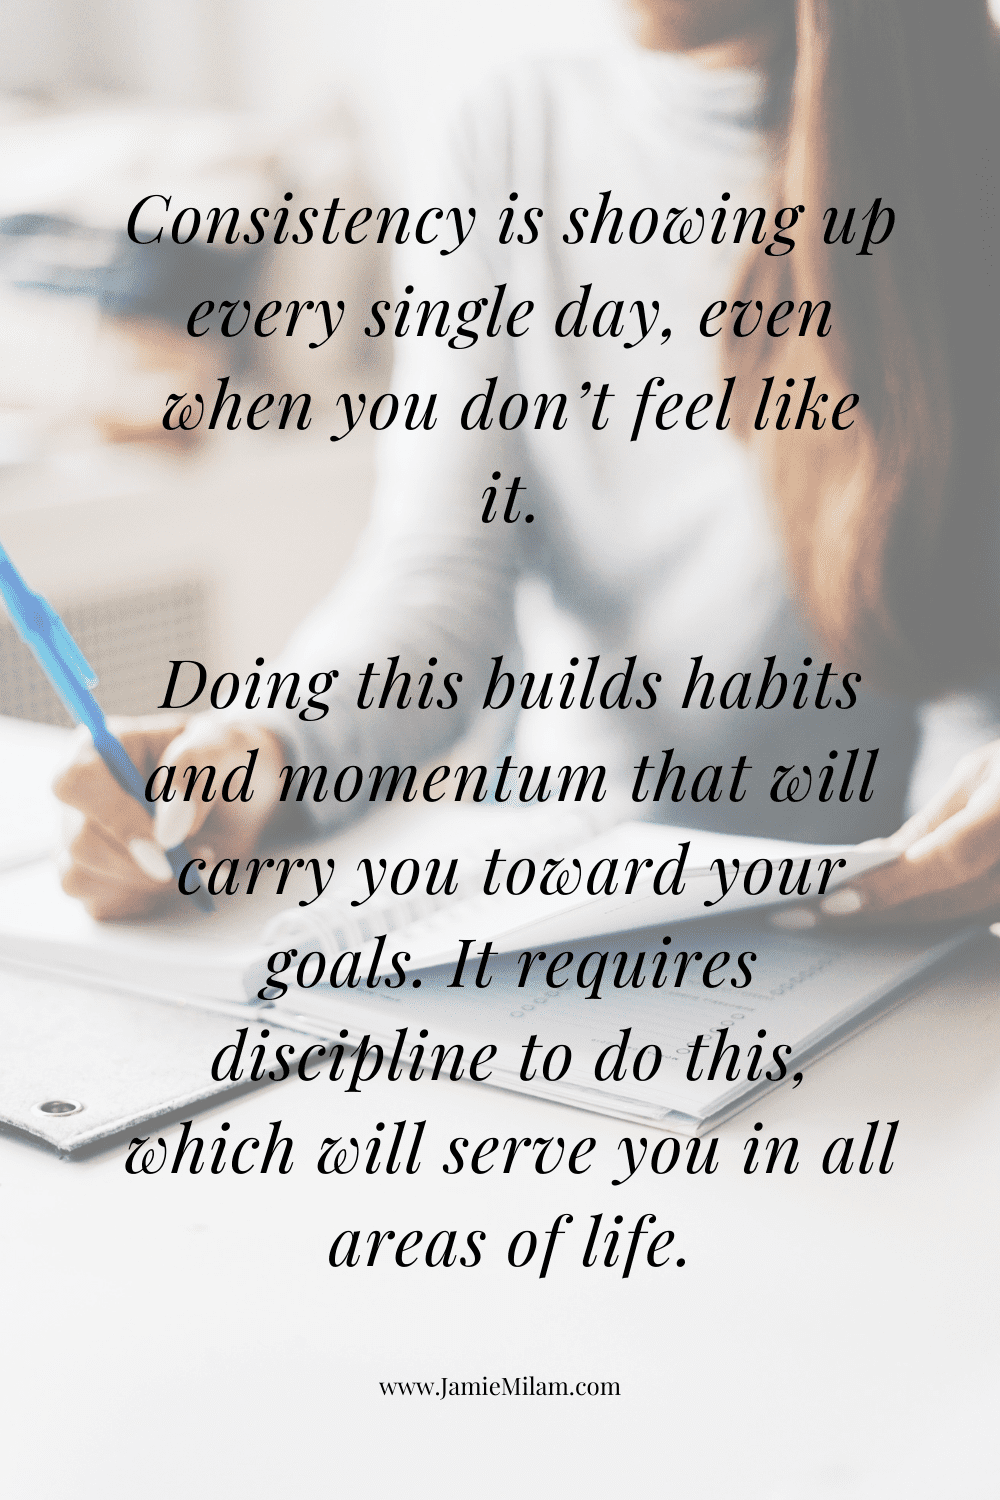 Image of woman writing in a journal with a quote on top: Consistency is showing up every single day, even when you don’t feel like it.  Doing this builds habits and momentum that will carry you toward your goals. It requires discipline to do this, which will serve you in all areas of life."